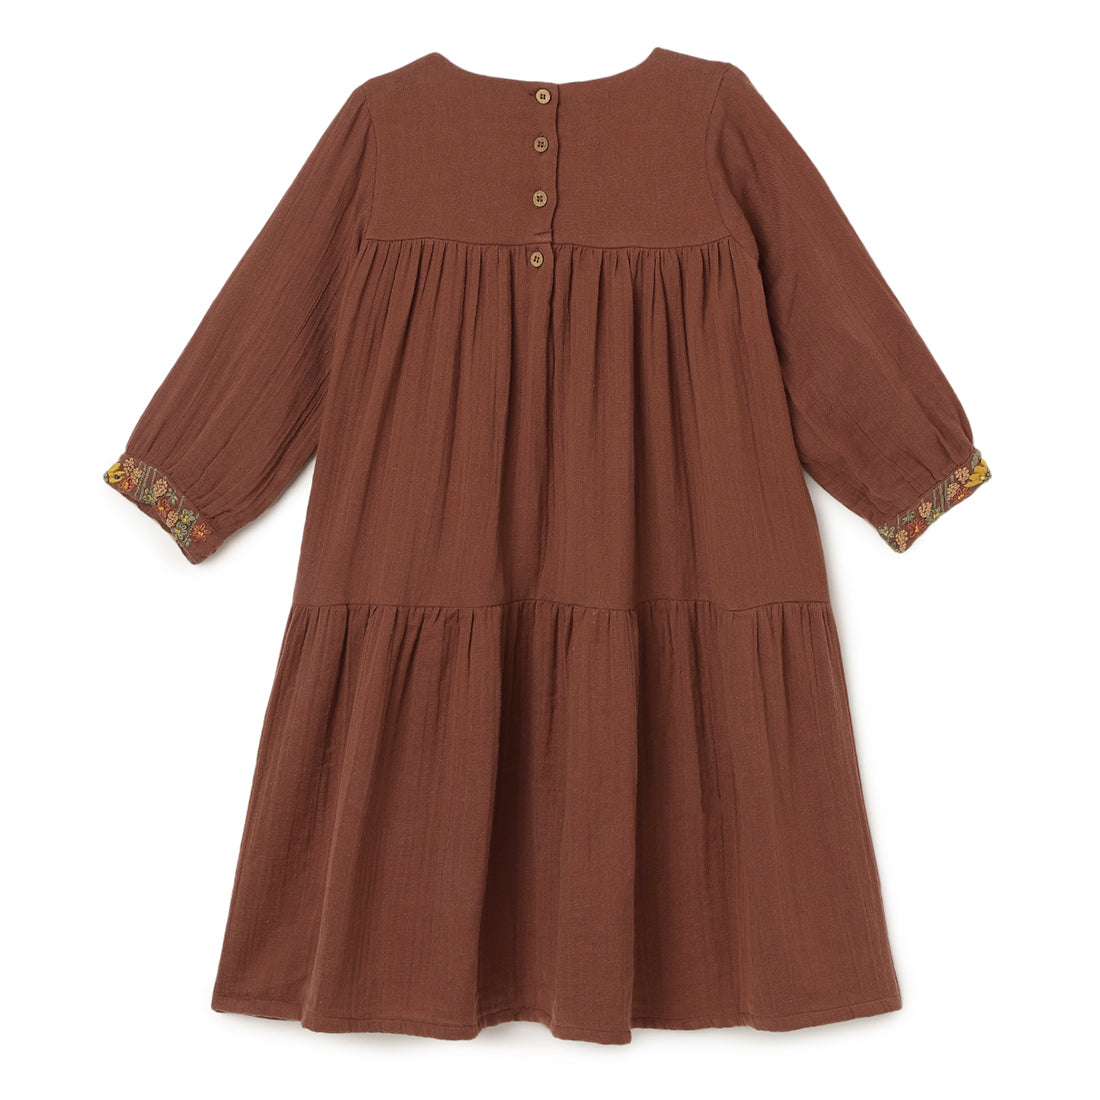 Girls Embroidered Cotton Dress Rust Brown - 1 yr to 8 yrs - Back